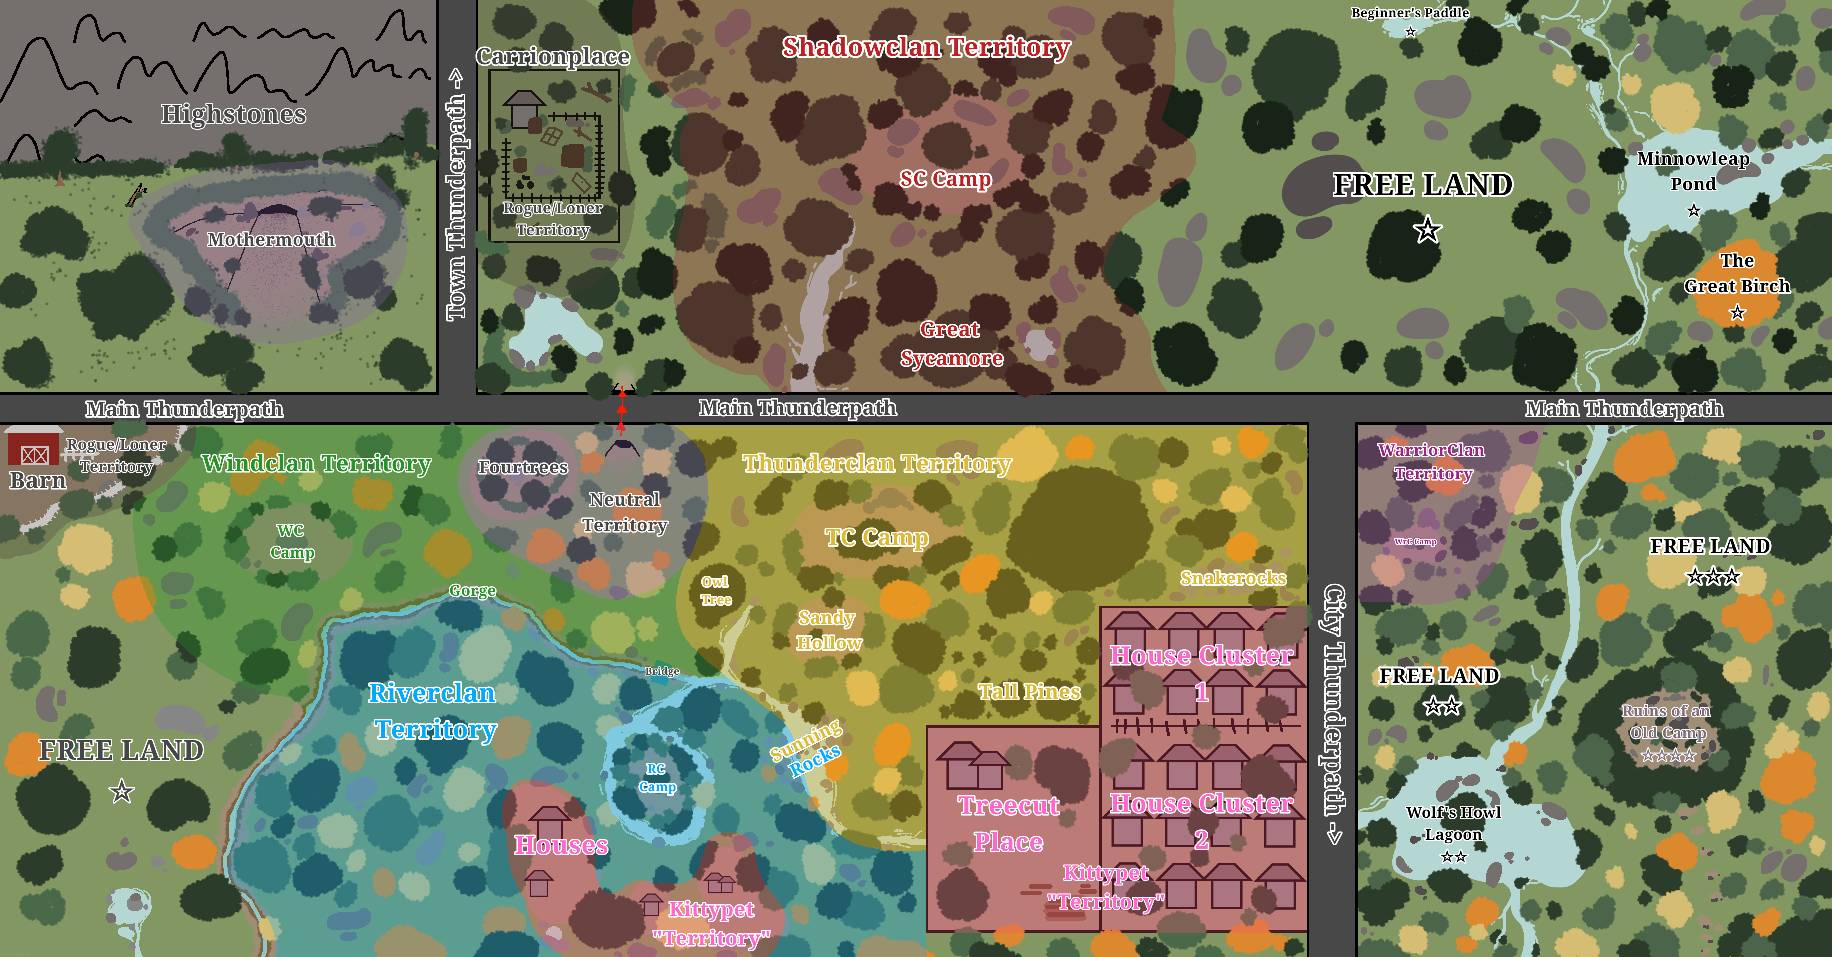 Camp Half-Blood Forest Map by kingbirdy on DeviantArt